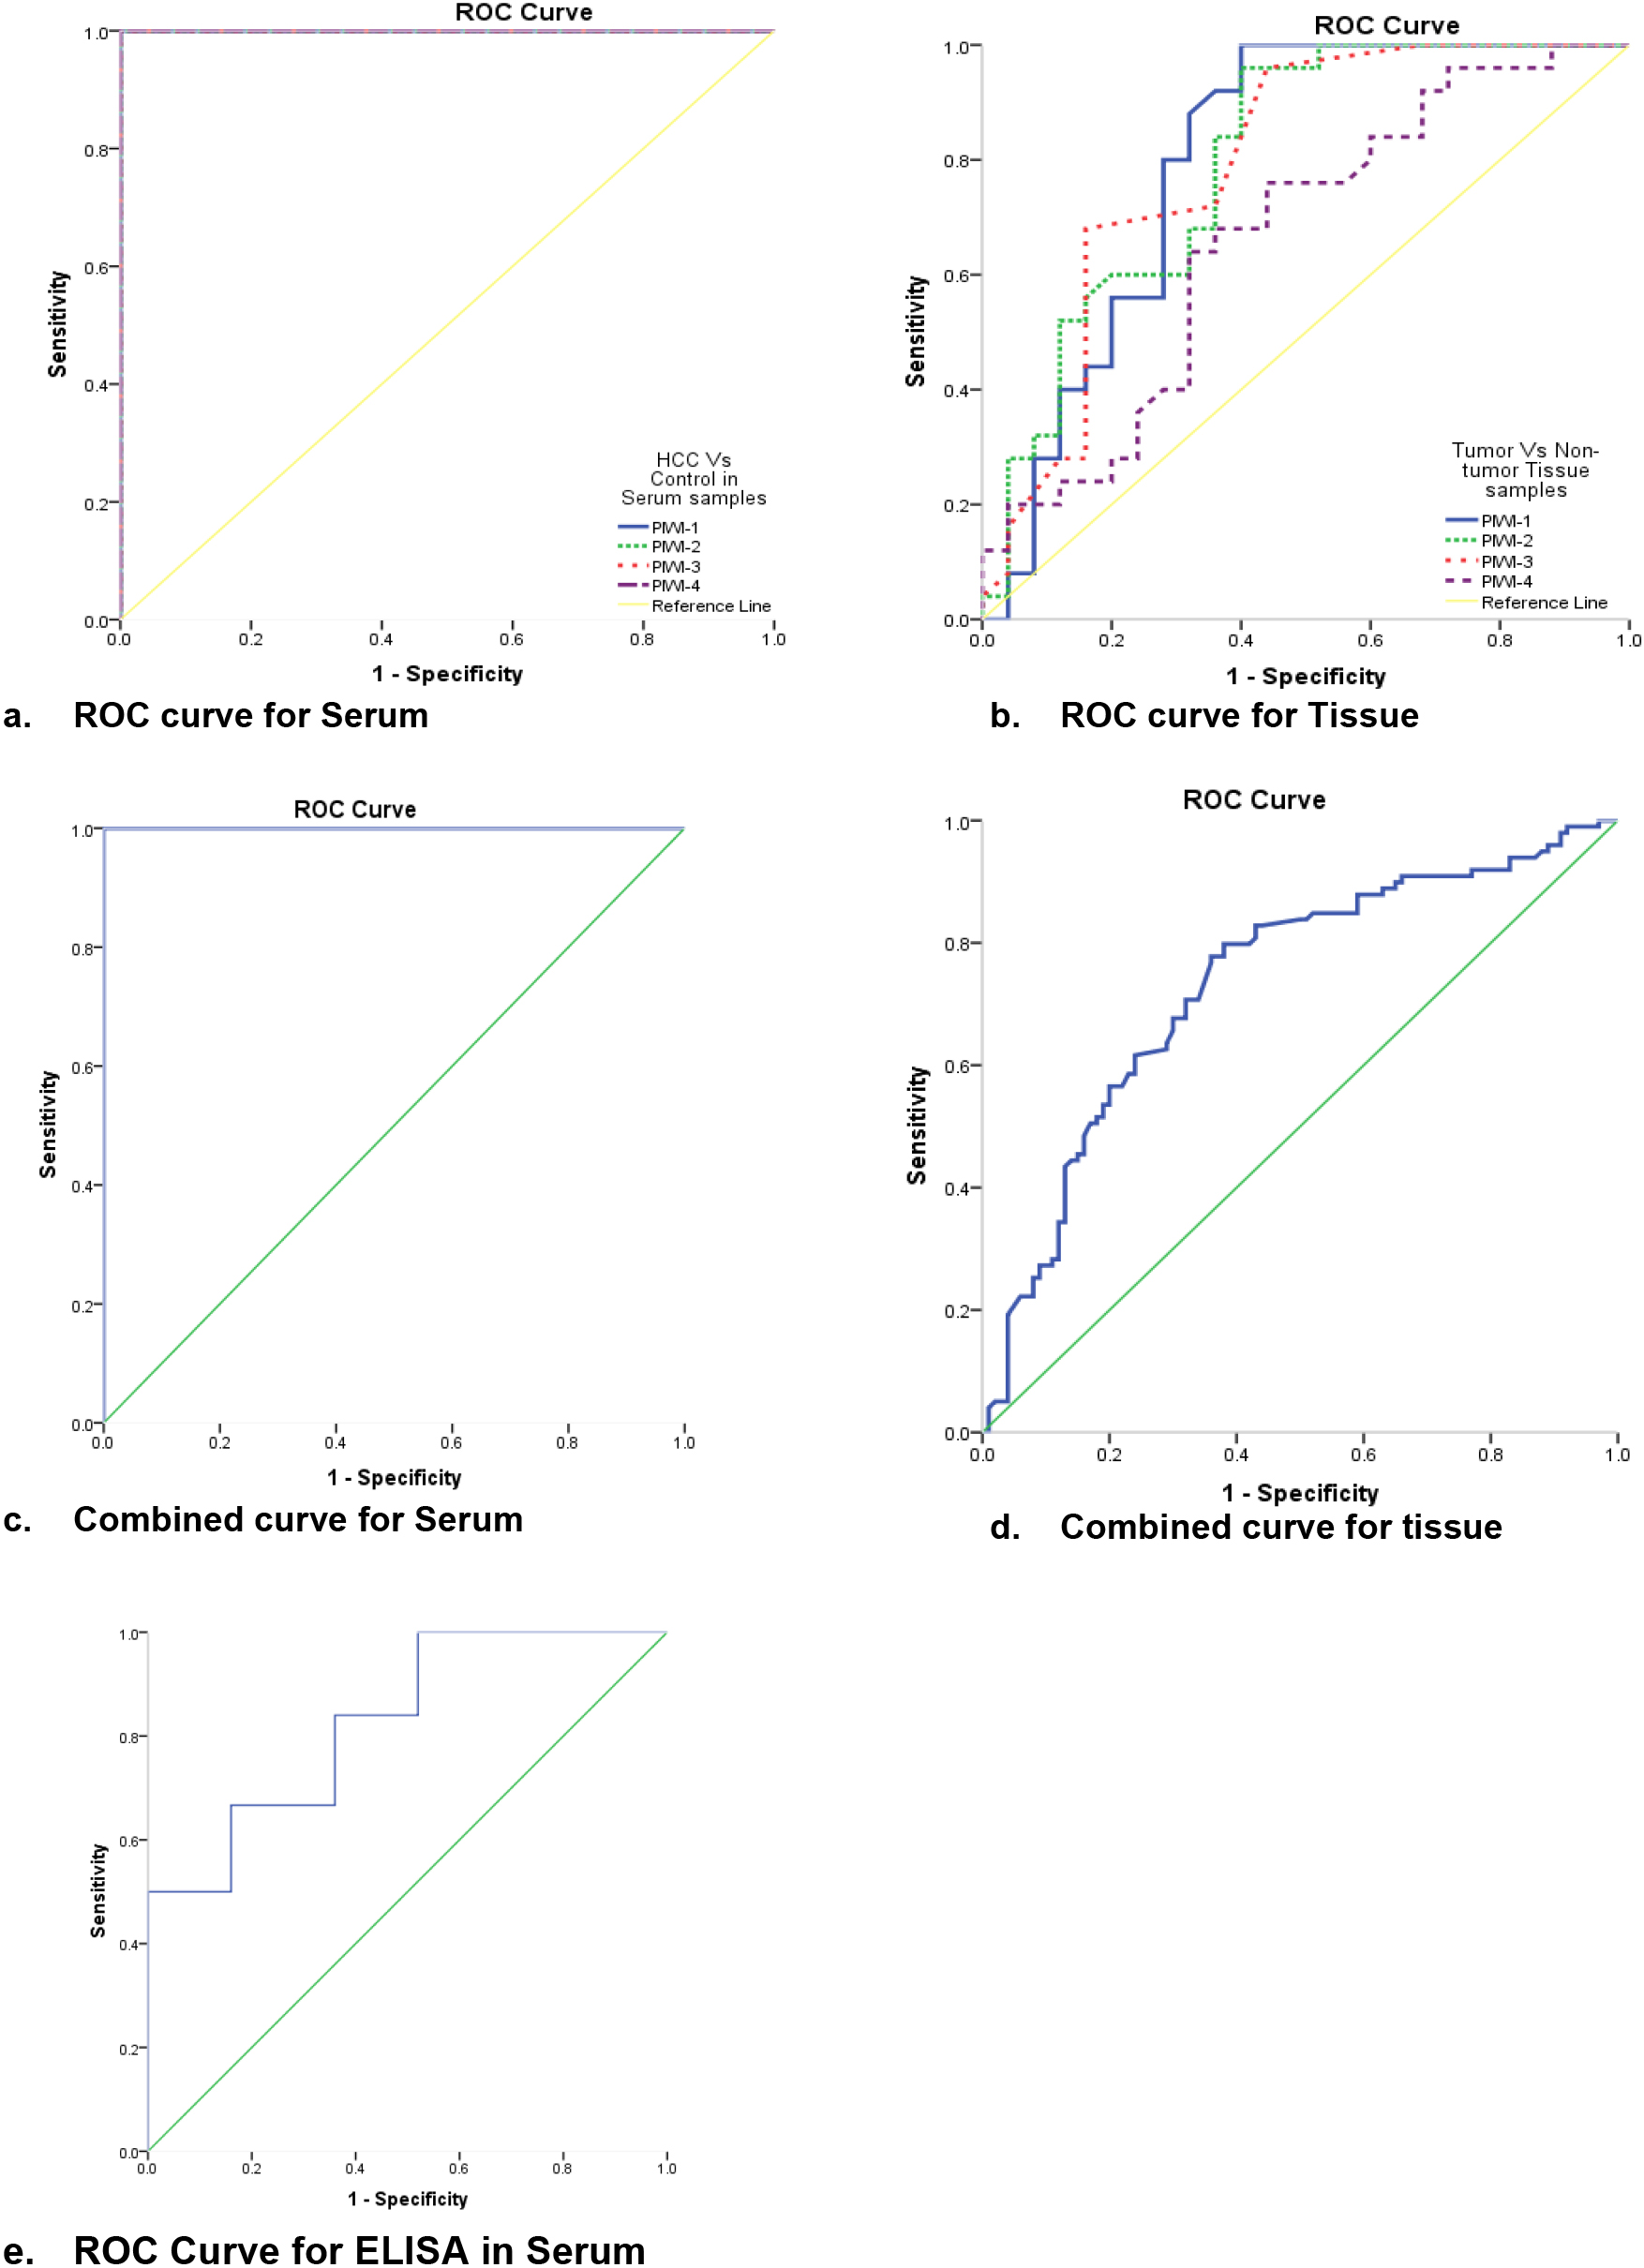 ROC curves of the studied PIWIL mRNA in (a) serum and (b) tissue samples. (C & D) are combined curves for serum and tissue, respectively. (E) ROC curve for AFP measured by ELISA in serum samples of HCC patients. Graphs depict the diagnostic performance of all PIWIL mRNAs in terms of specificity & sensitivity.